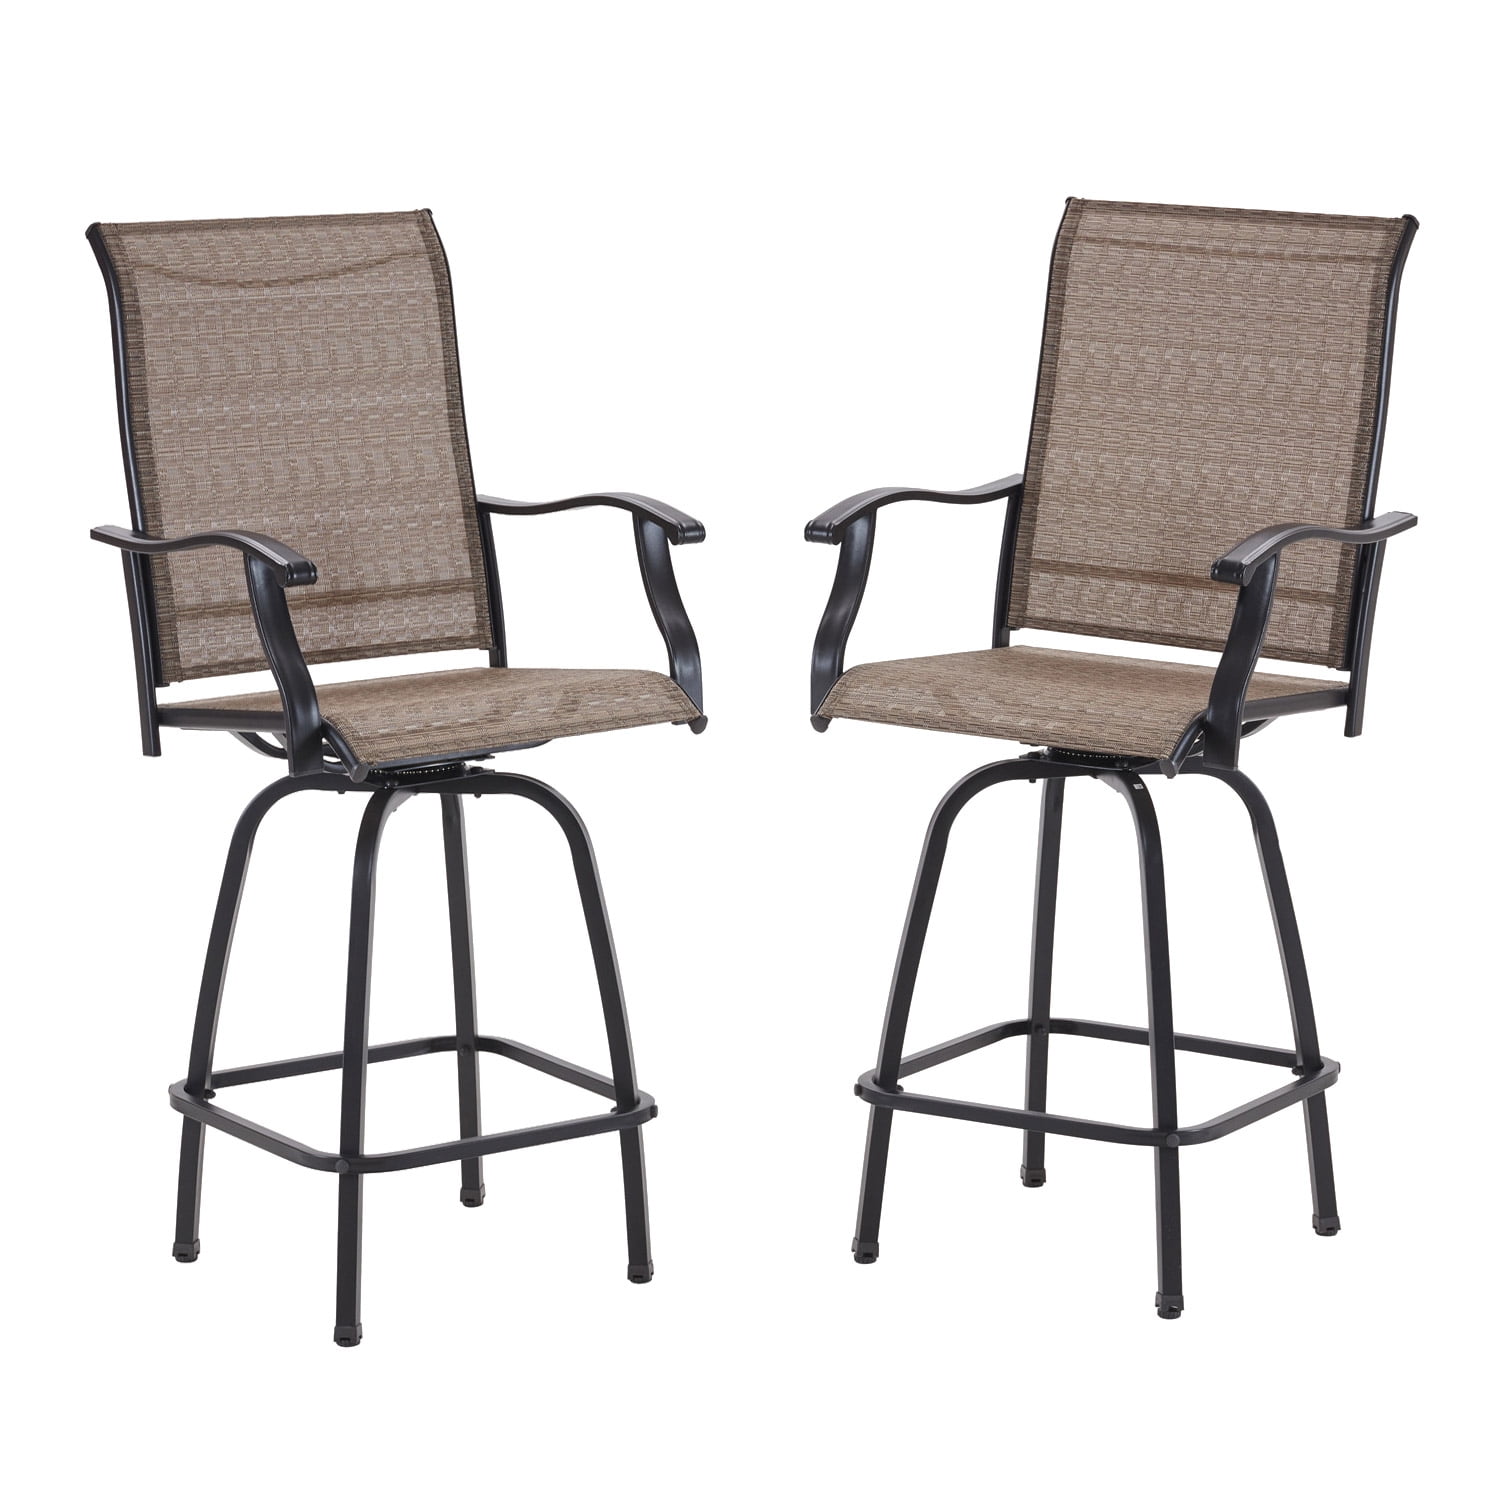 VICLLAX Outdoor Texline Swivel Bar Stools All-Weather Patio Bar Height Chairs, Pack of 2 for Garden Lawn Backyard, Black